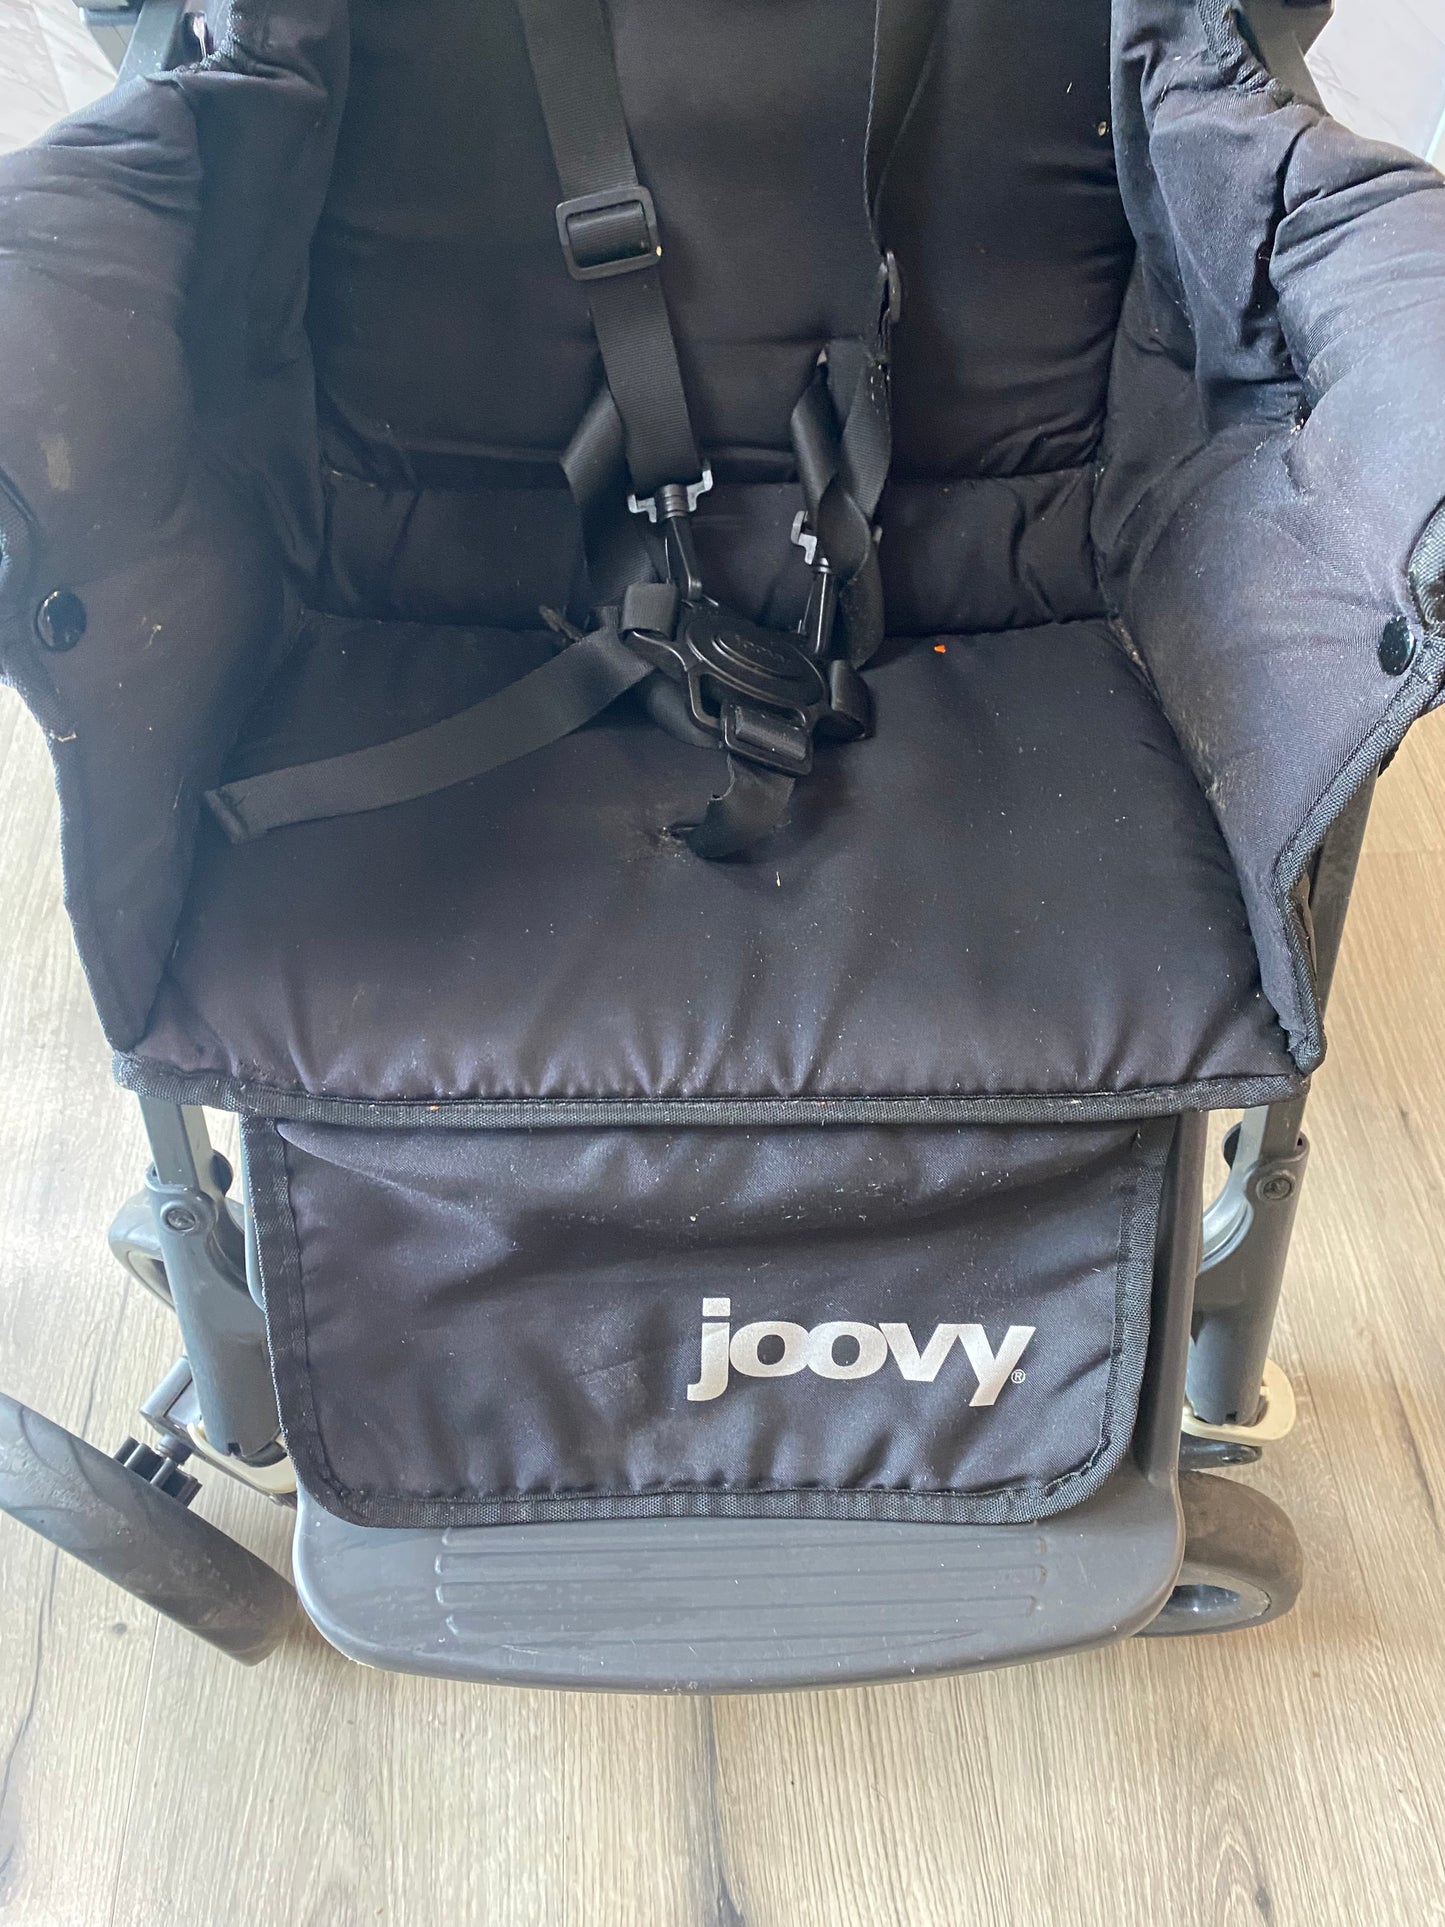 Joovy Caboose Sit & Stand Stroller w/ Extra Seat